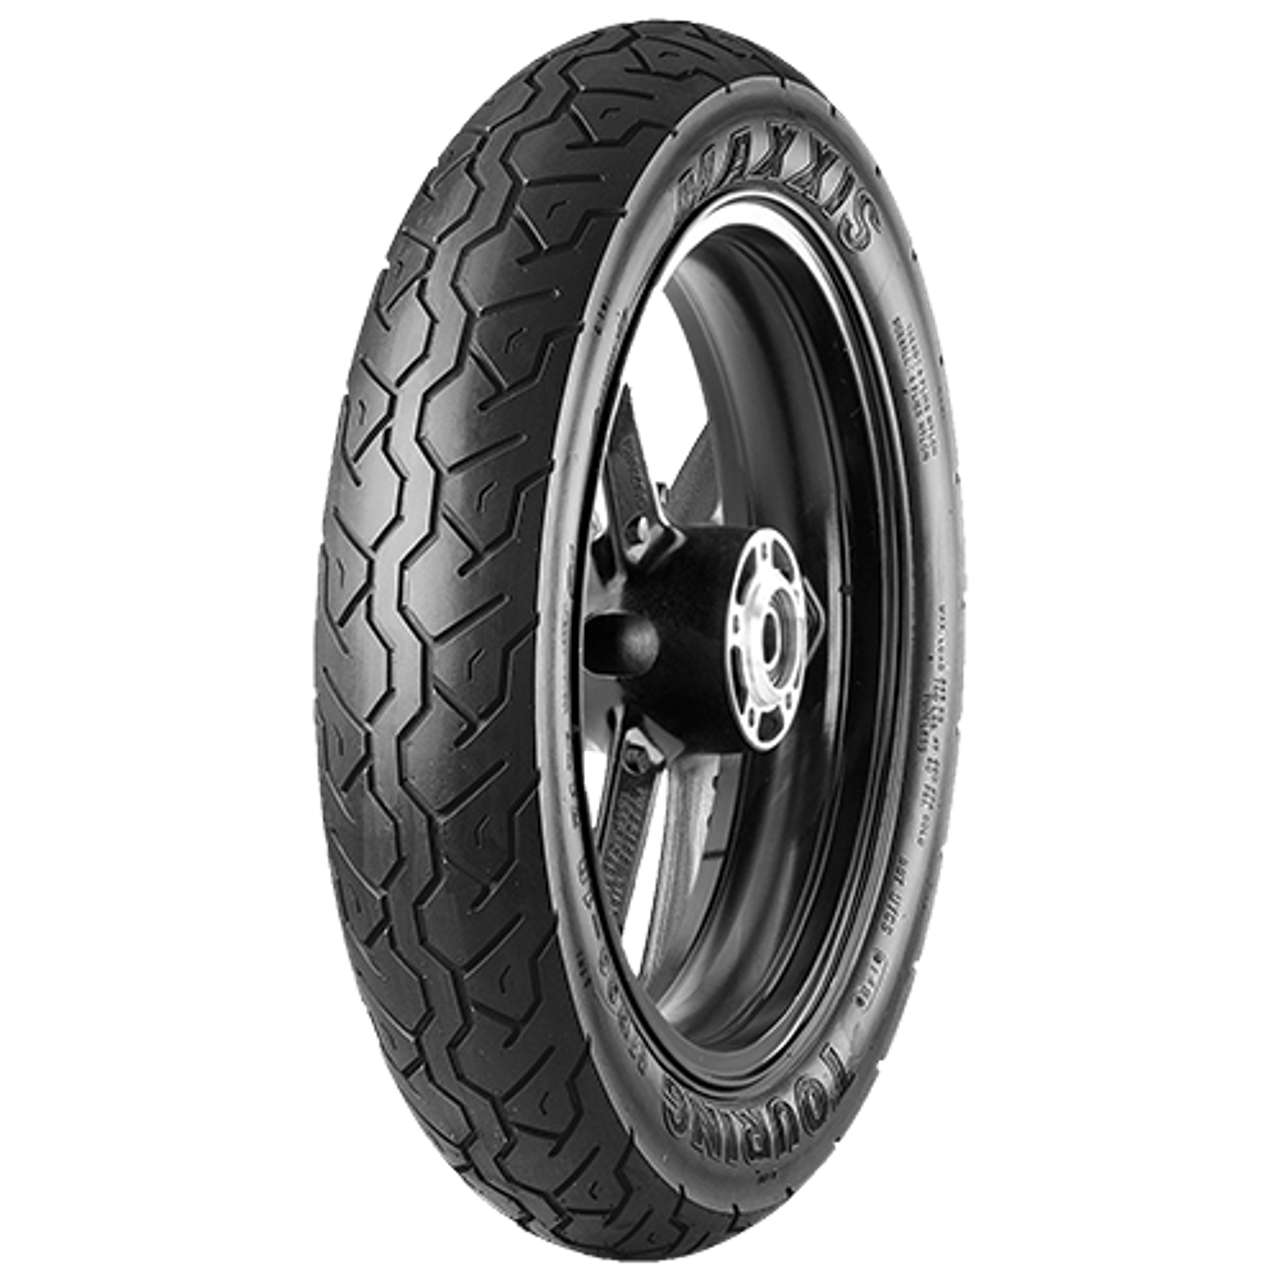 MAXXIS M6011 CLASSIC FRONT 90 - 16 TL 74H FRONT von MAXXIS